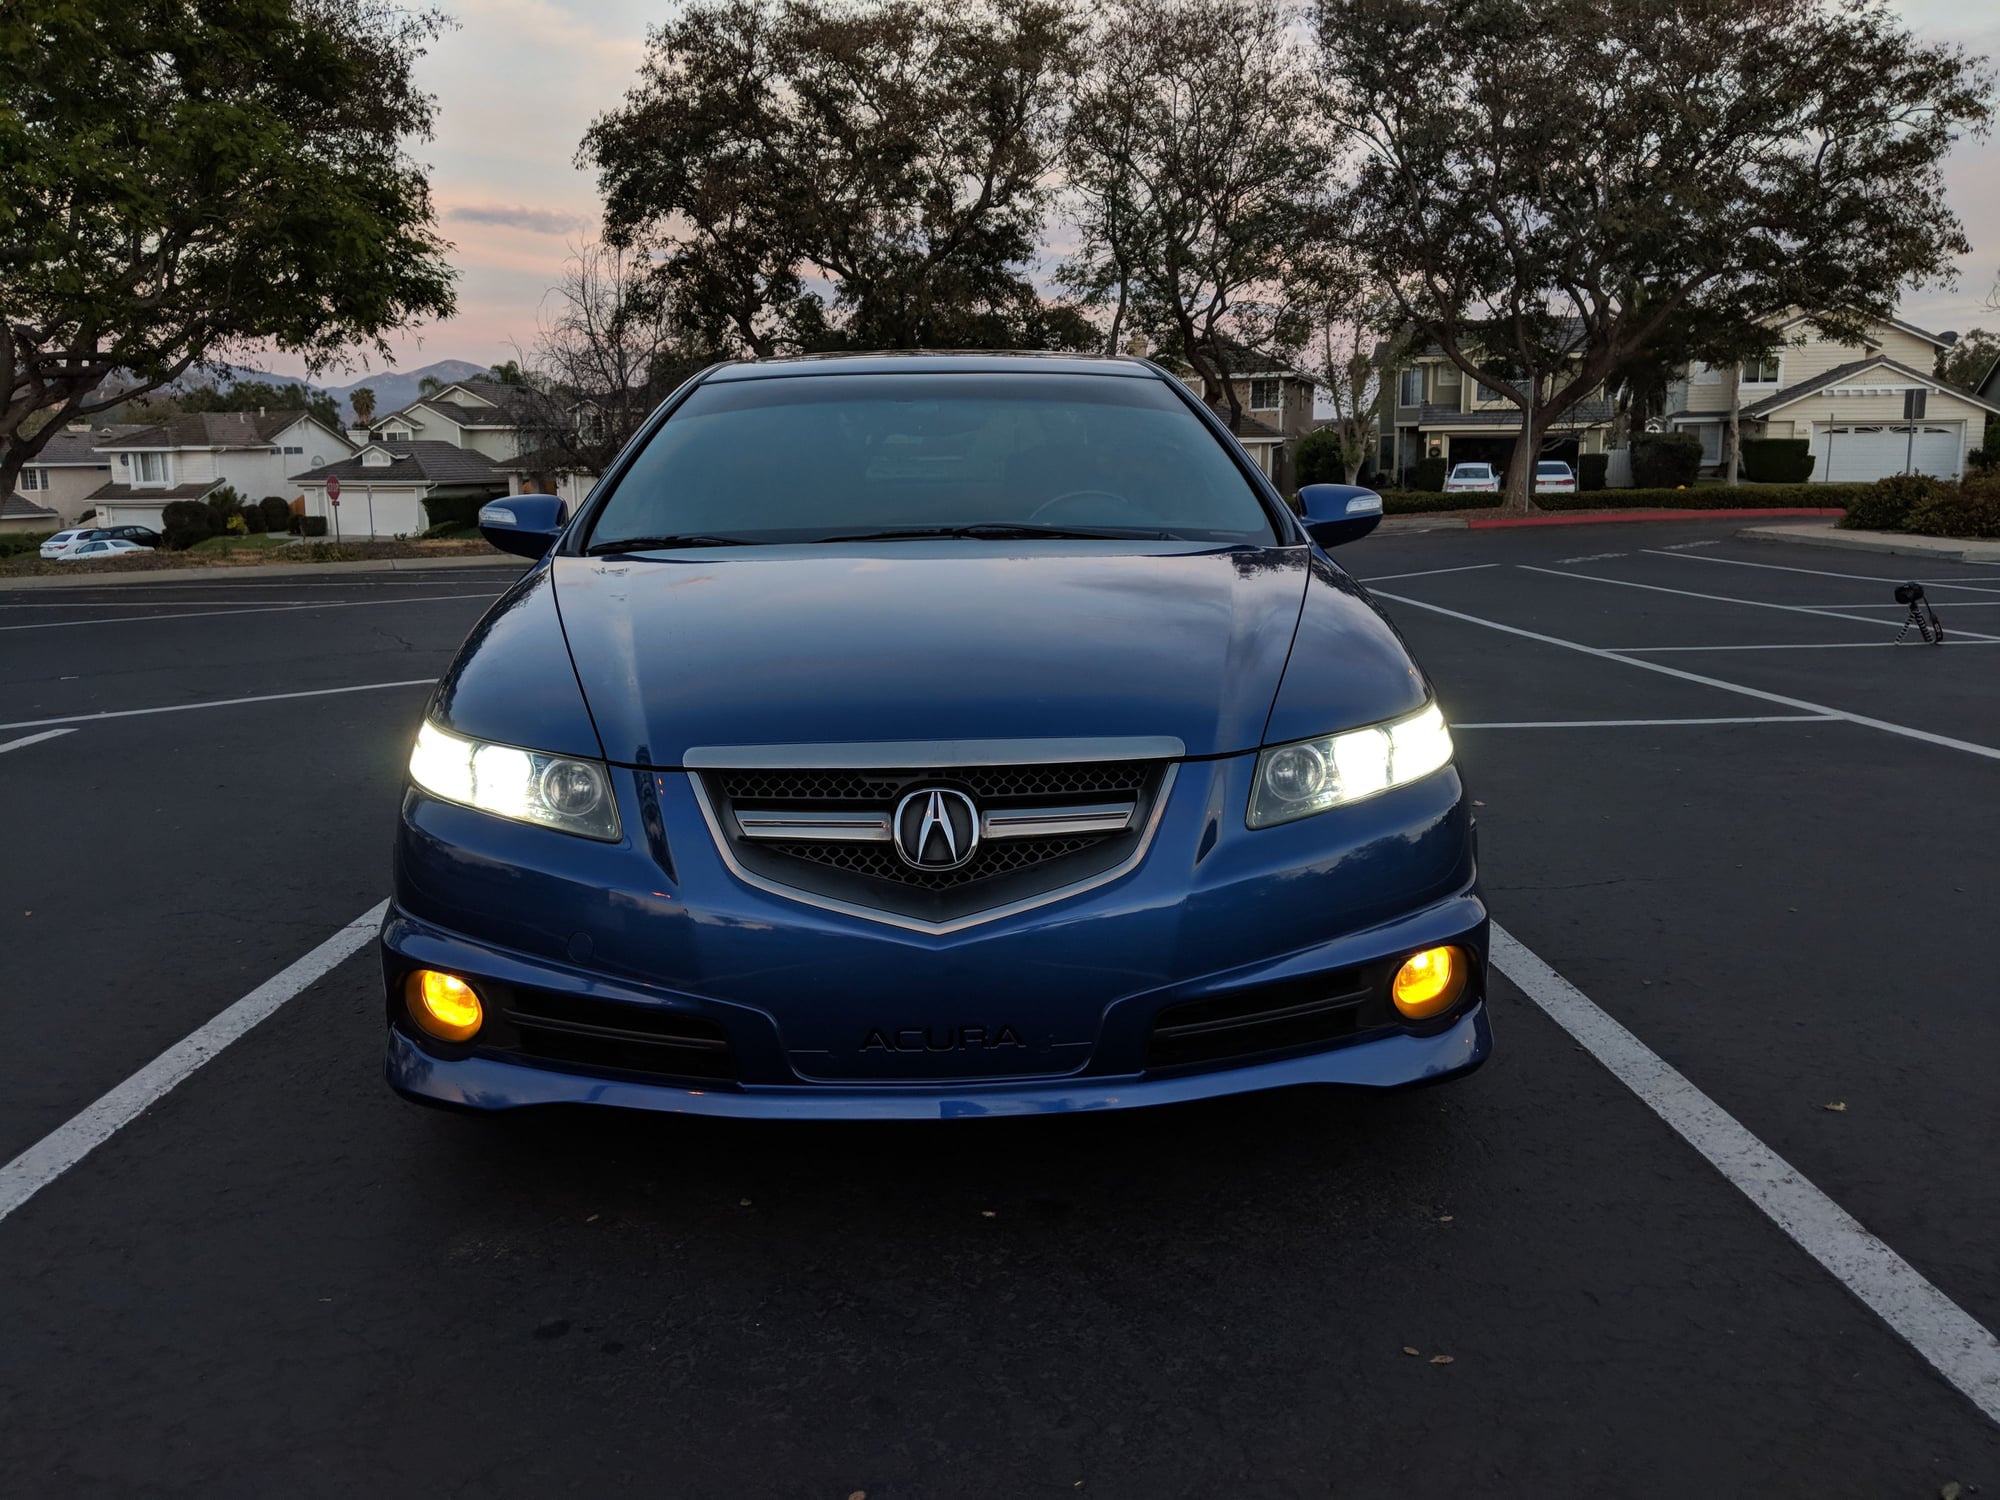 2007 Acura TL - CLOSED: Bagged 07 Acura TL Type S - Kinetic Blue - Super Clean - Used - VIN 19UUA76537A008822 - 128,500 Miles - 6 cyl - 2WD - Automatic - Sedan - Blue - San Diego, CA 92128, United States